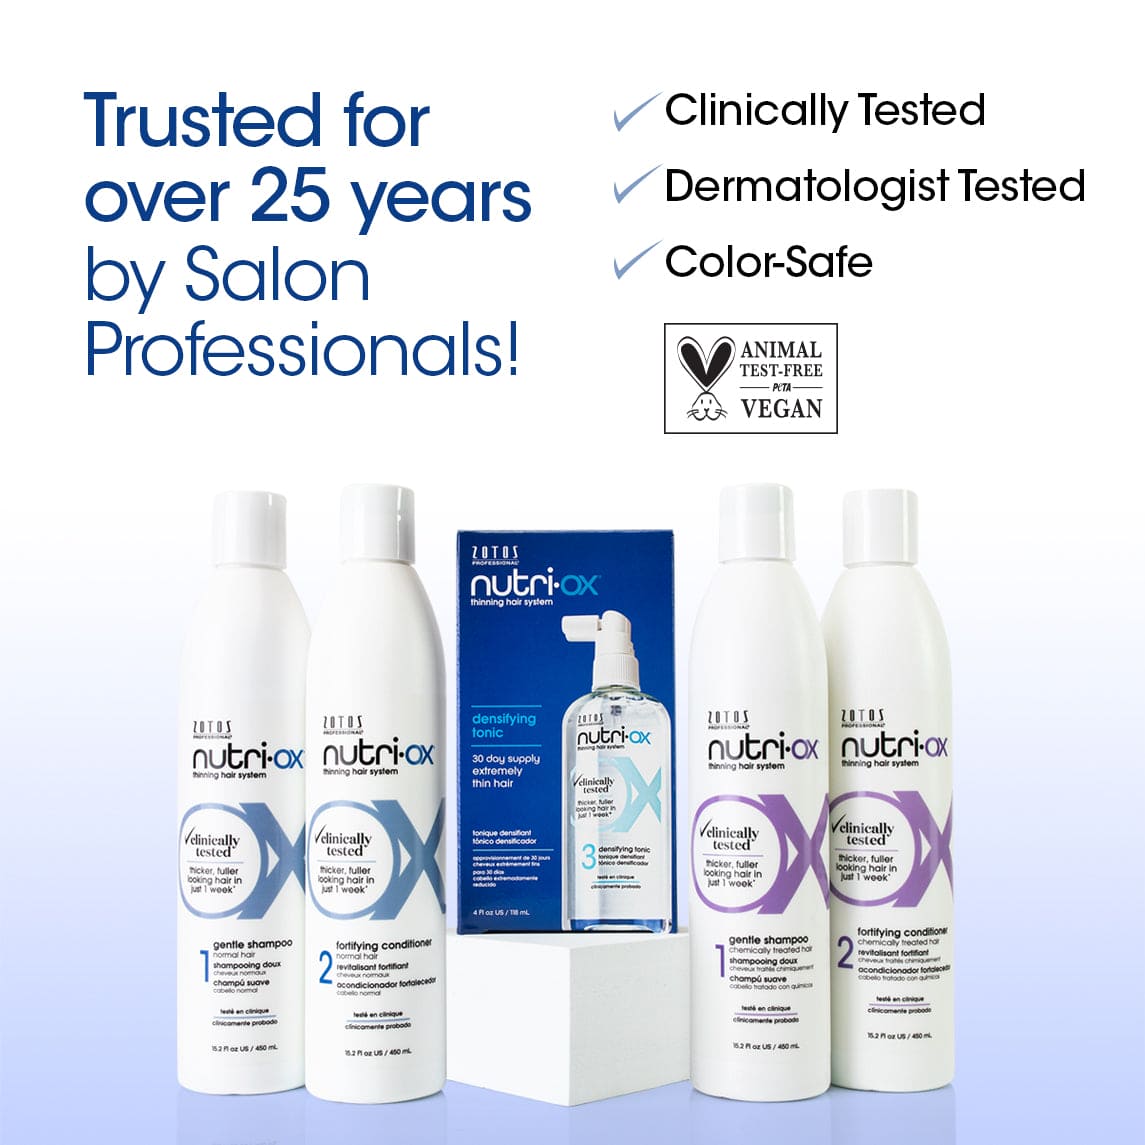 Trusted for over 25 years by Salon Professionals! Clinically and dermatologist tested, color safe, animal test-free and vegan.